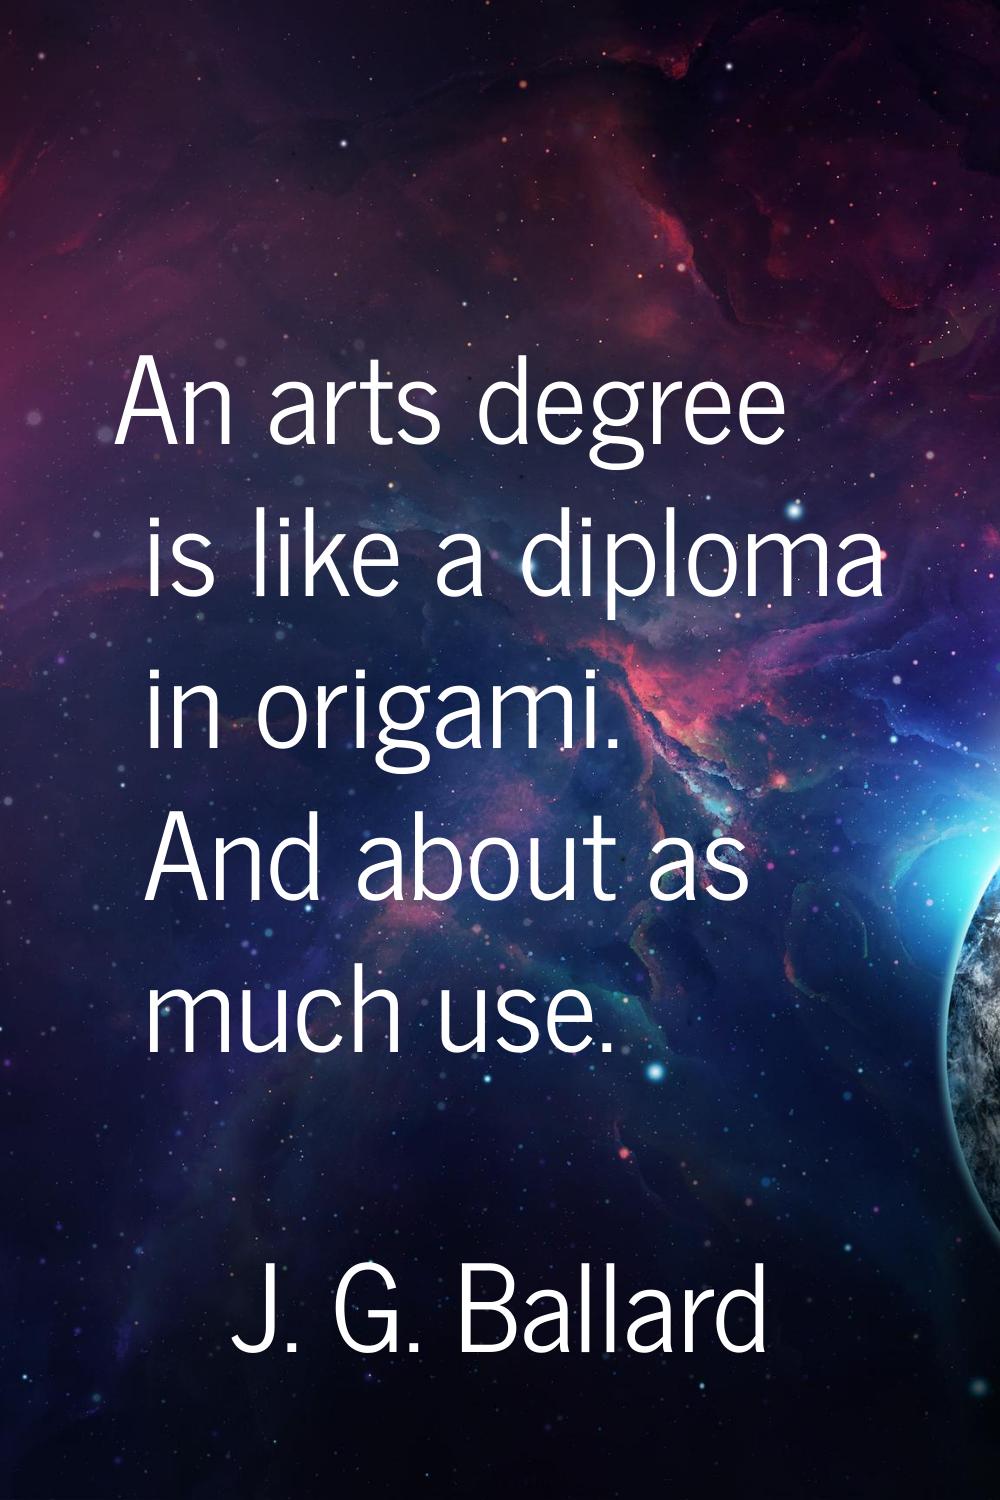 An arts degree is like a diploma in origami. And about as much use.